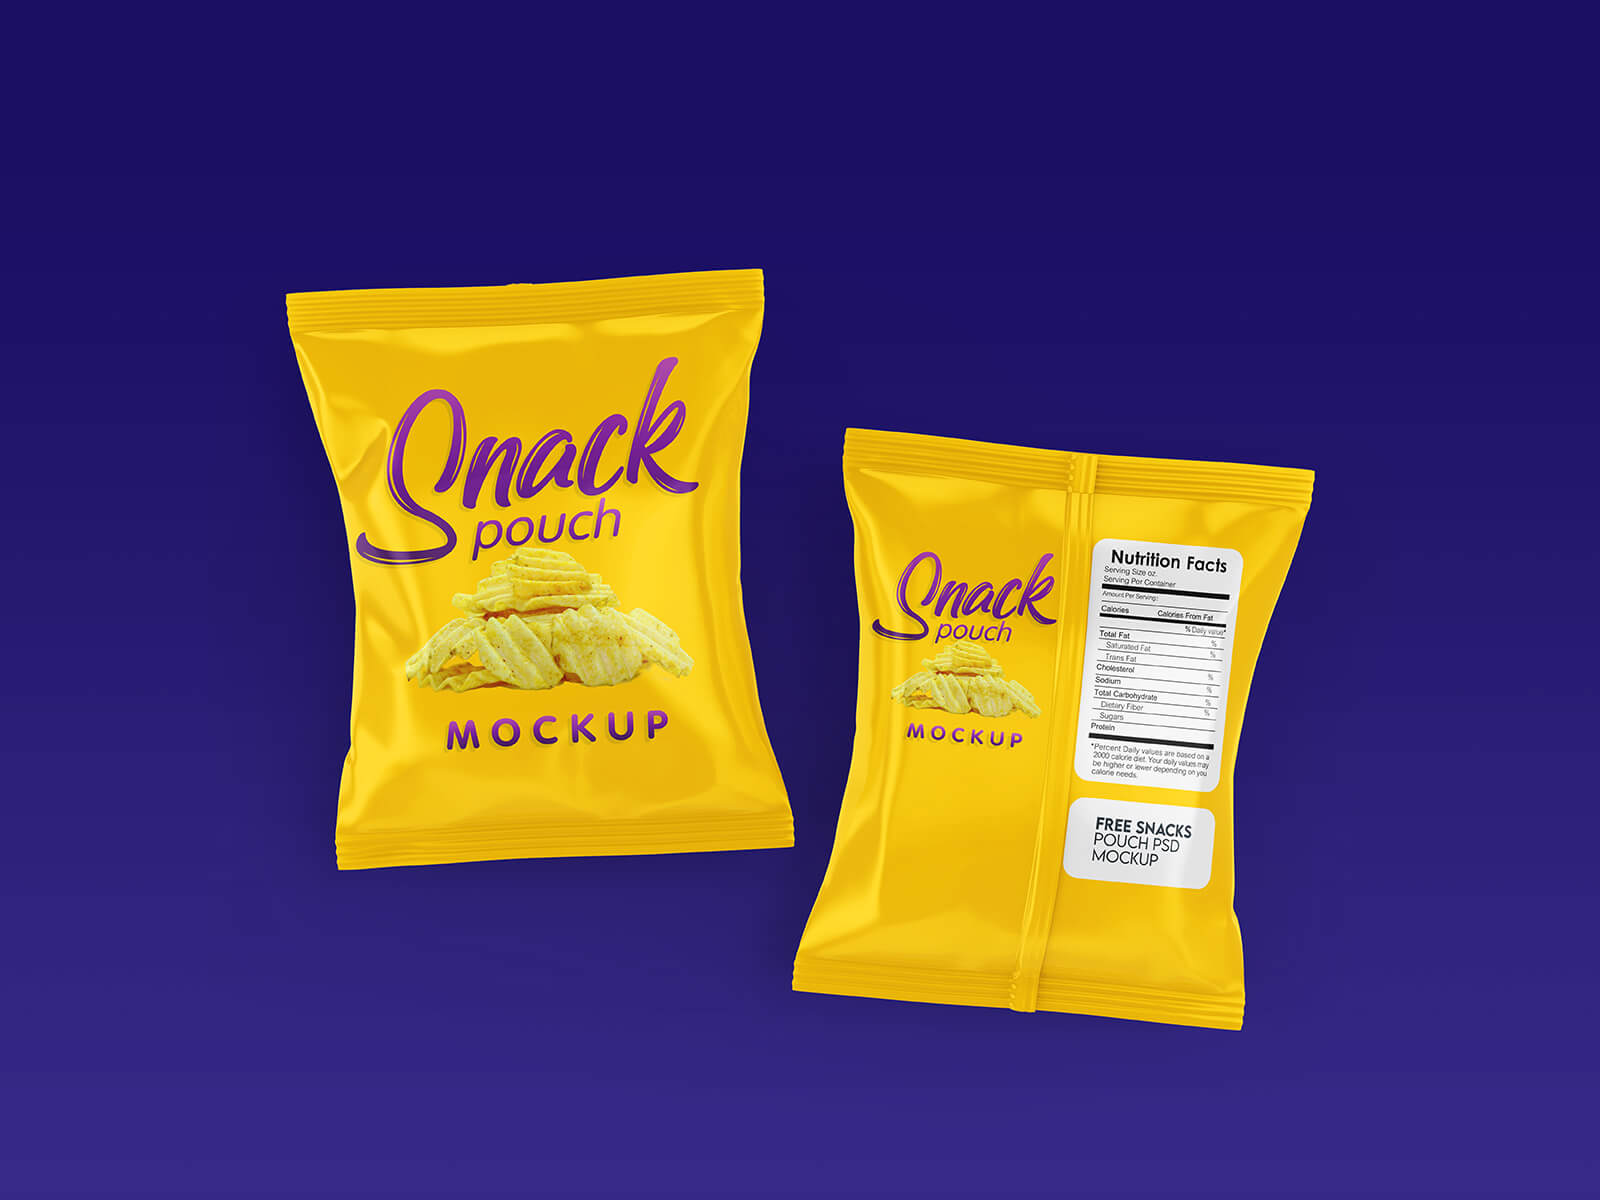 Free Snack Pouch Packaging Mockup PSD